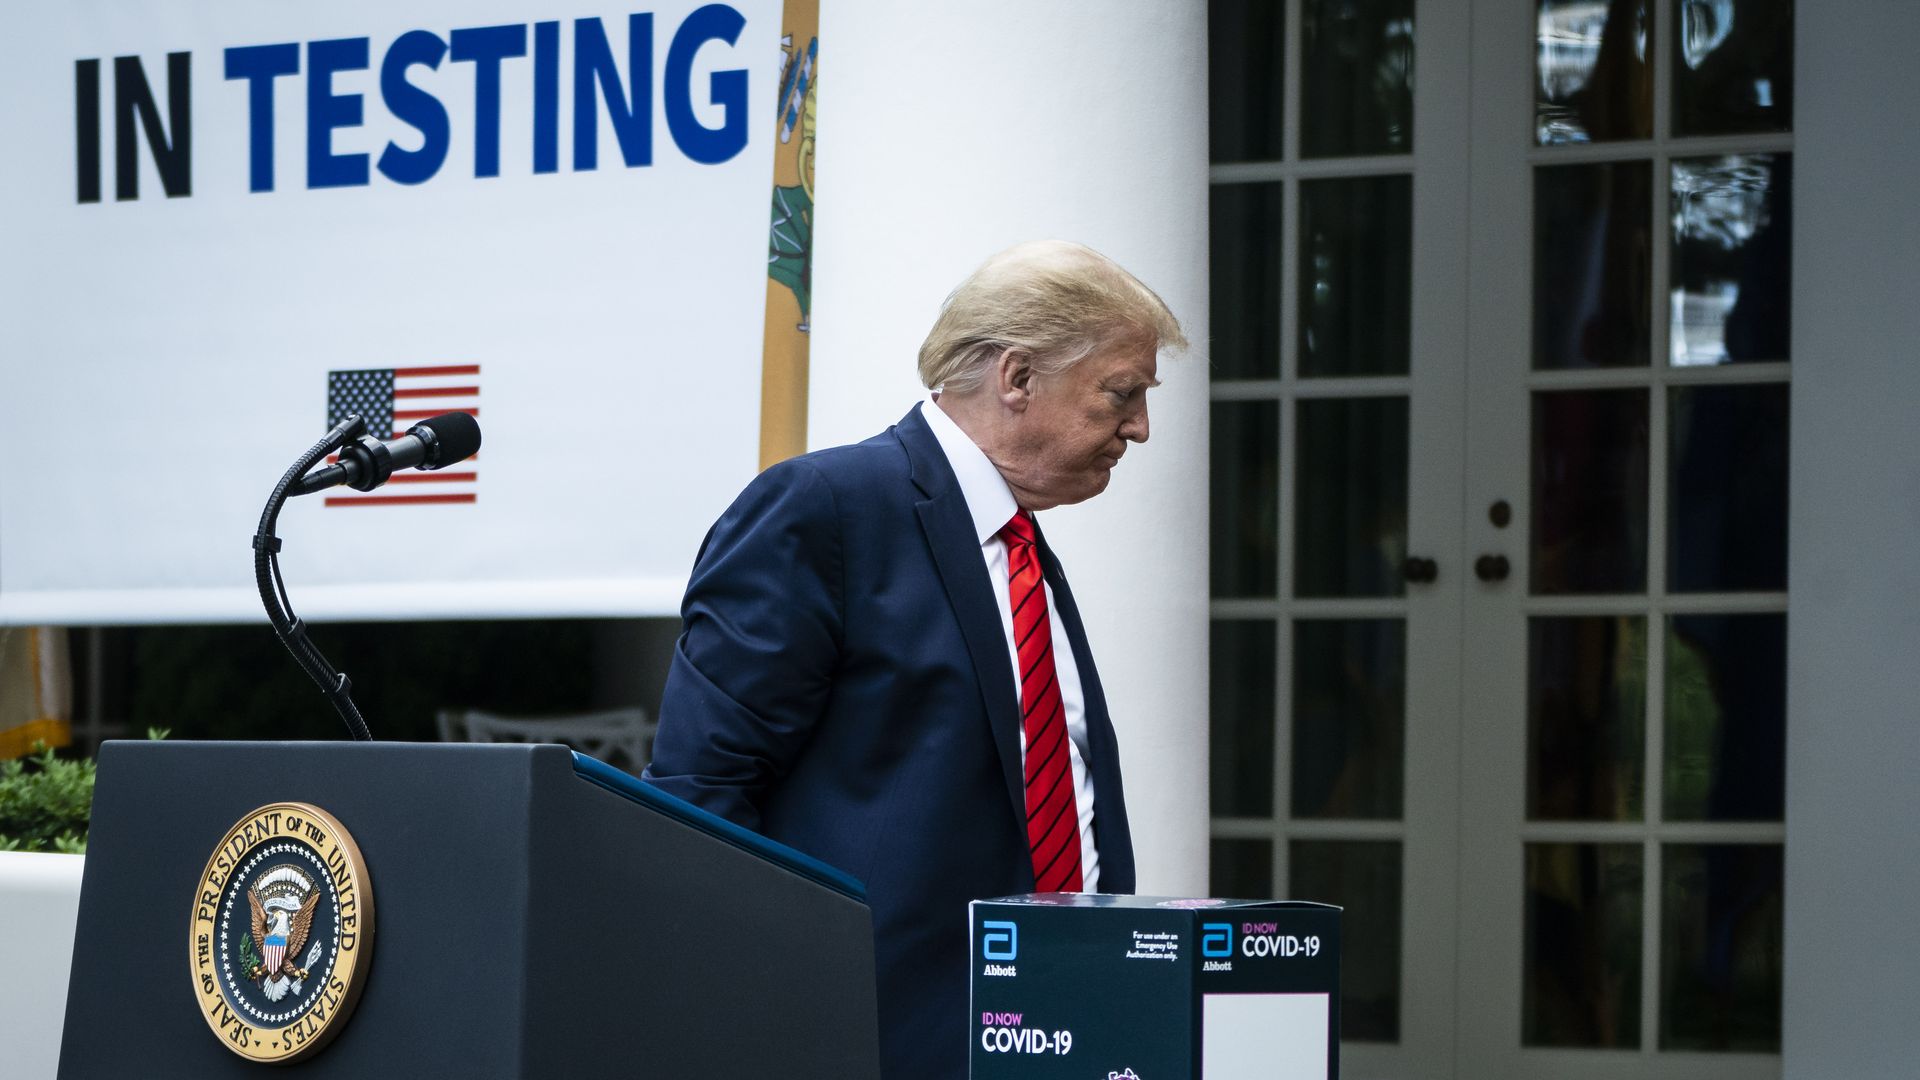 Donald Trump after delivering remarks during a press briefing on testing with administration officials.